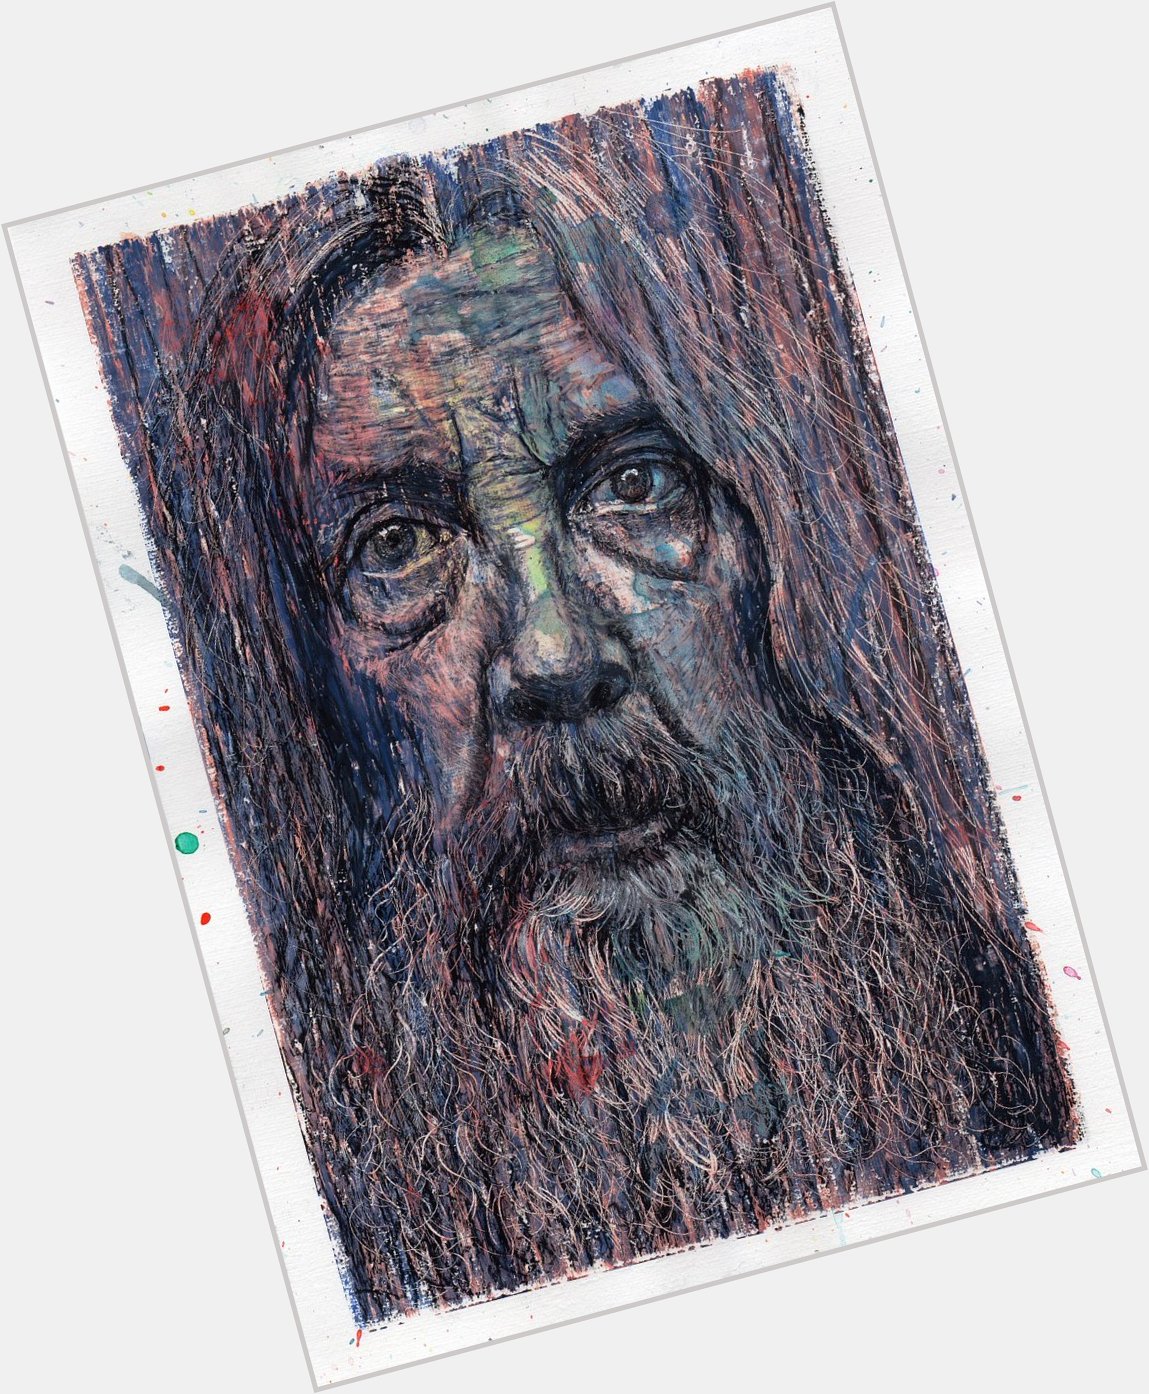 Happy birthday Alan Moore! This picture: oil and ink on acrylic paper, 21cm x 30cm. 